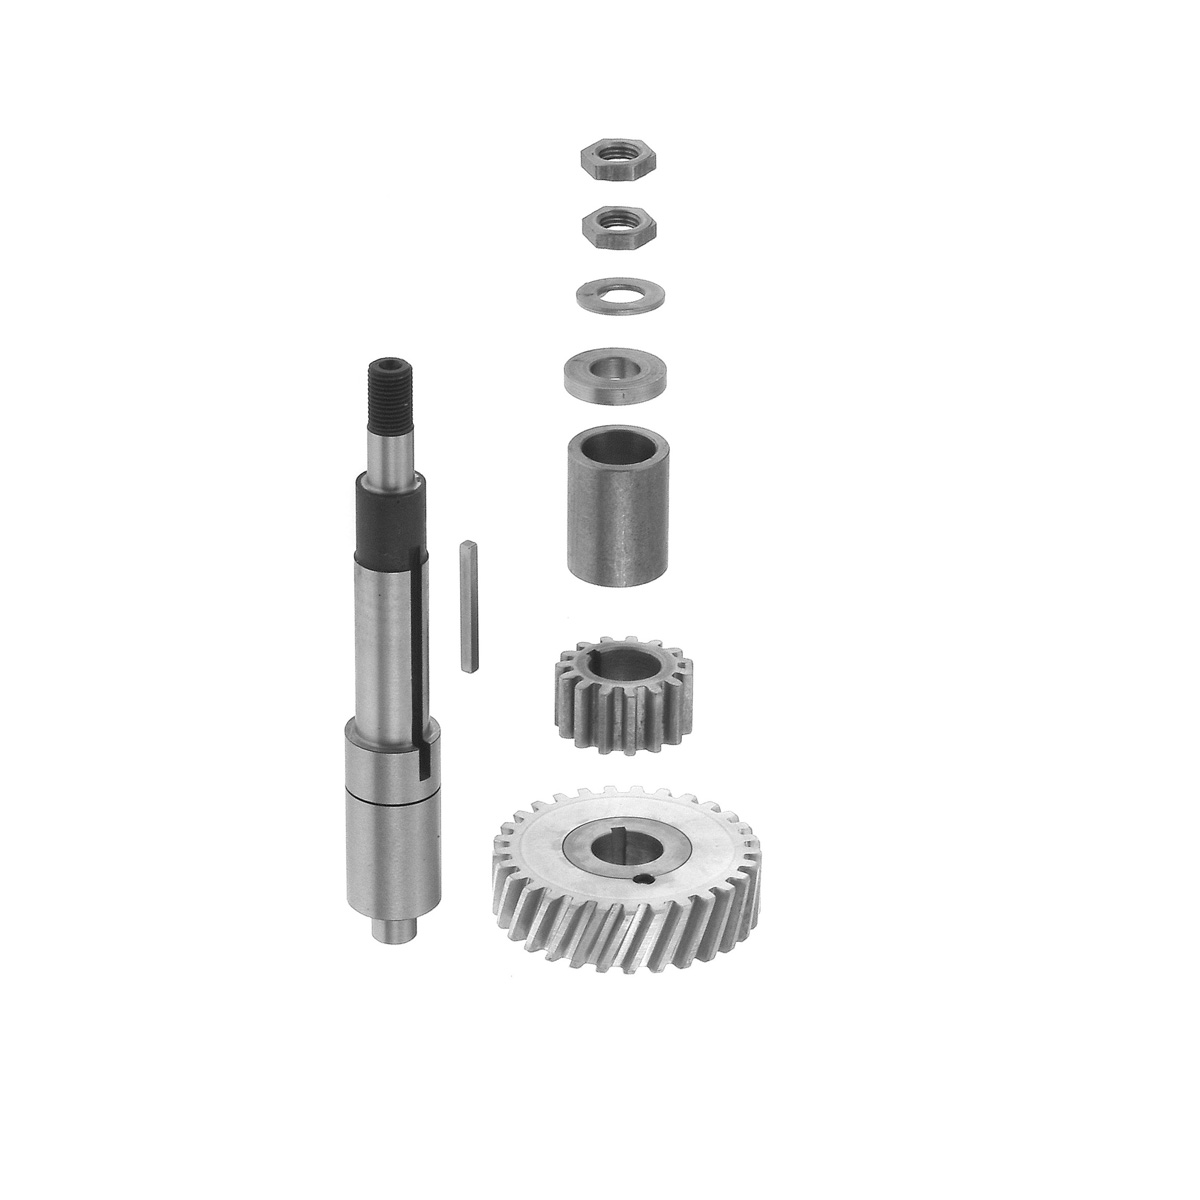 Worm Wheel Shaft Service Kit For Hobart Mixer Includes All Parts Shown In Black OEM # 293615